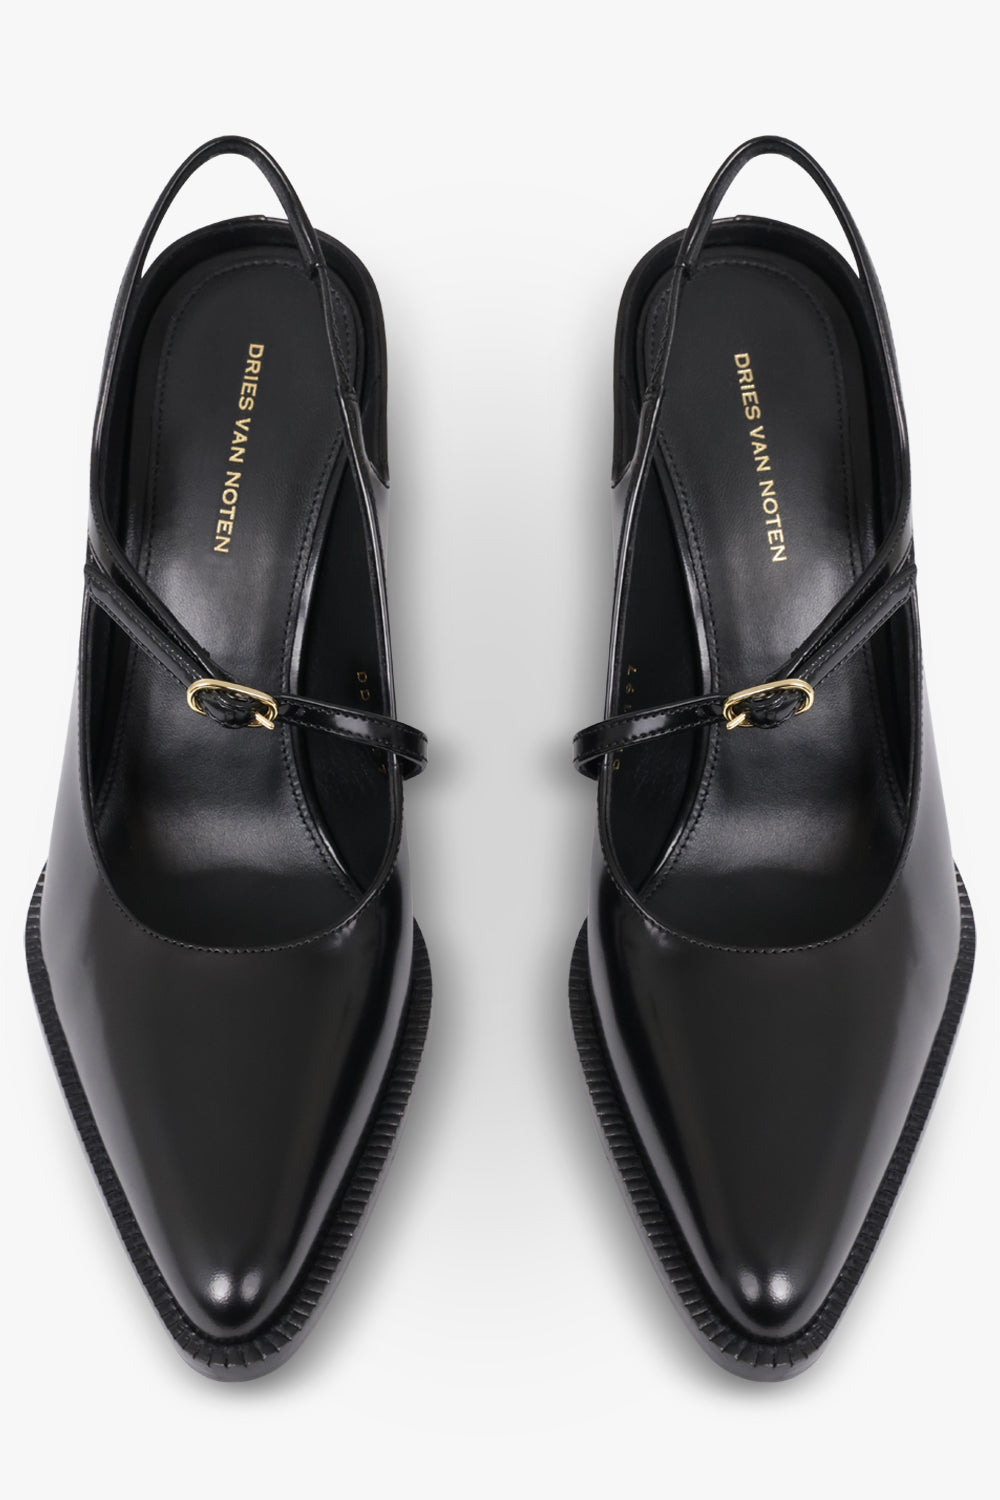 DRIES VAN NOTEN SHOES Shiny Pointed Toe Cruved 100Mm Pump | Black